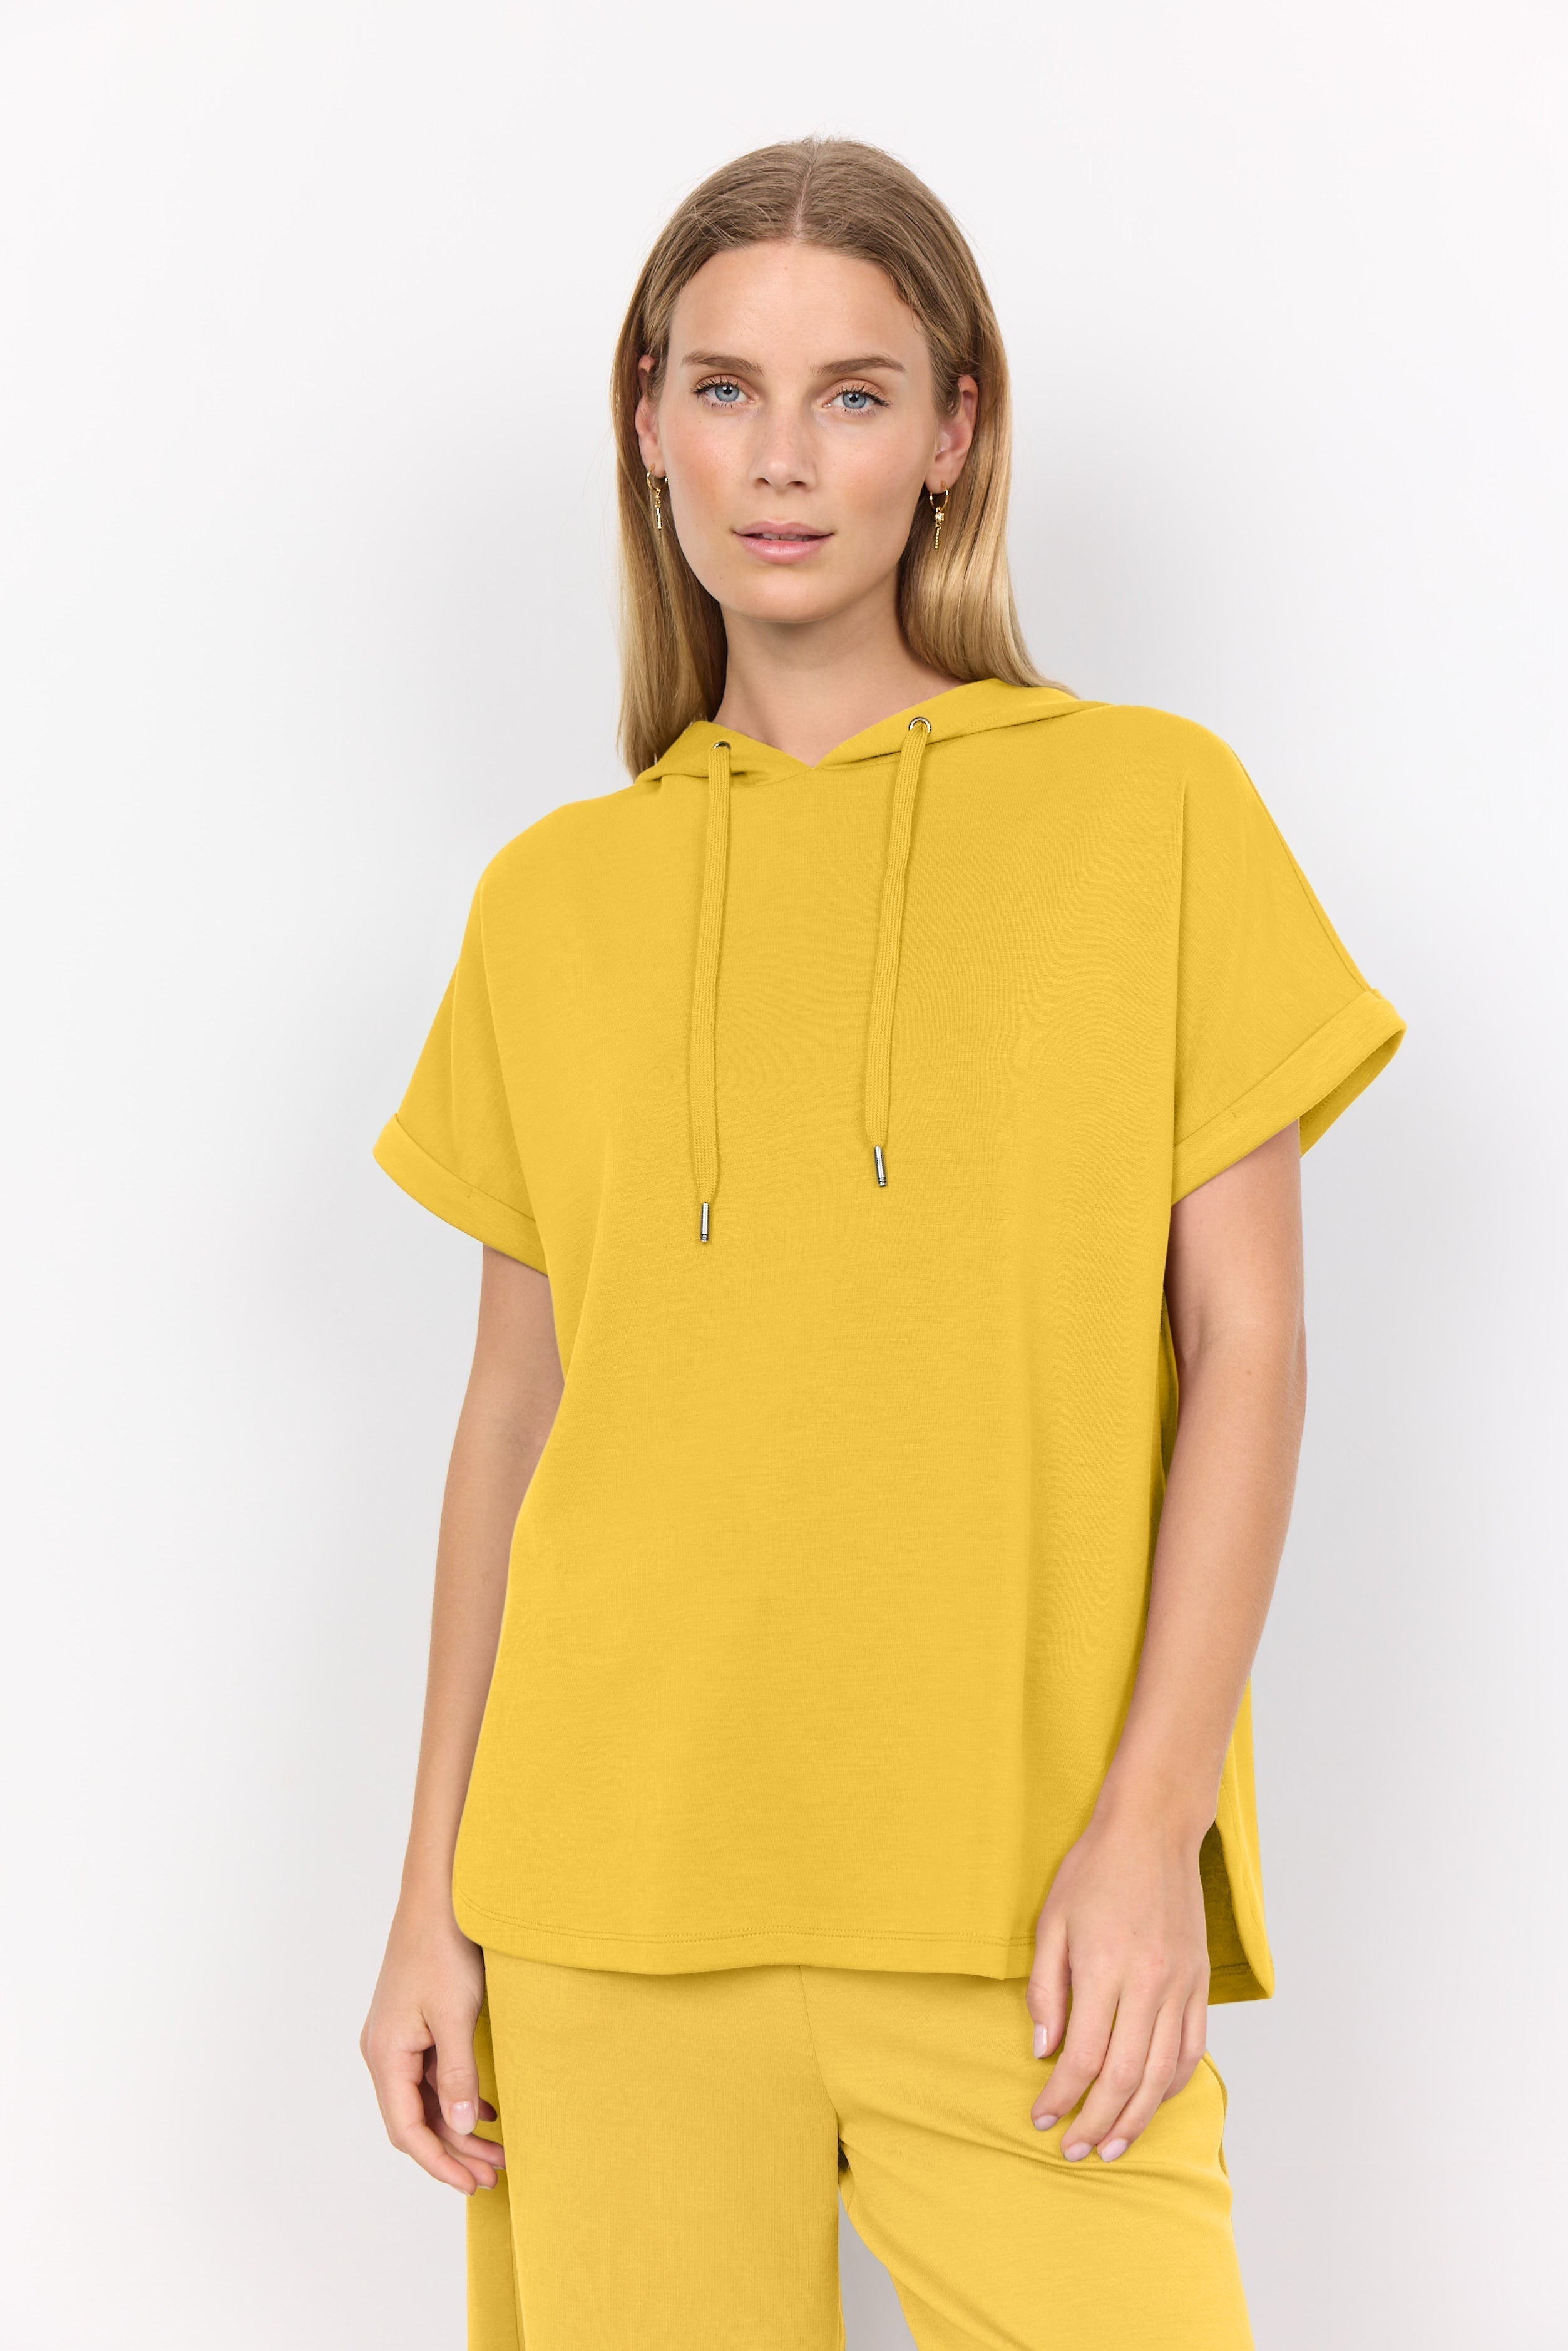 Soya Concept (26166) Short Dolman Sleeve Hooded Banu Popover in Golden Yellow